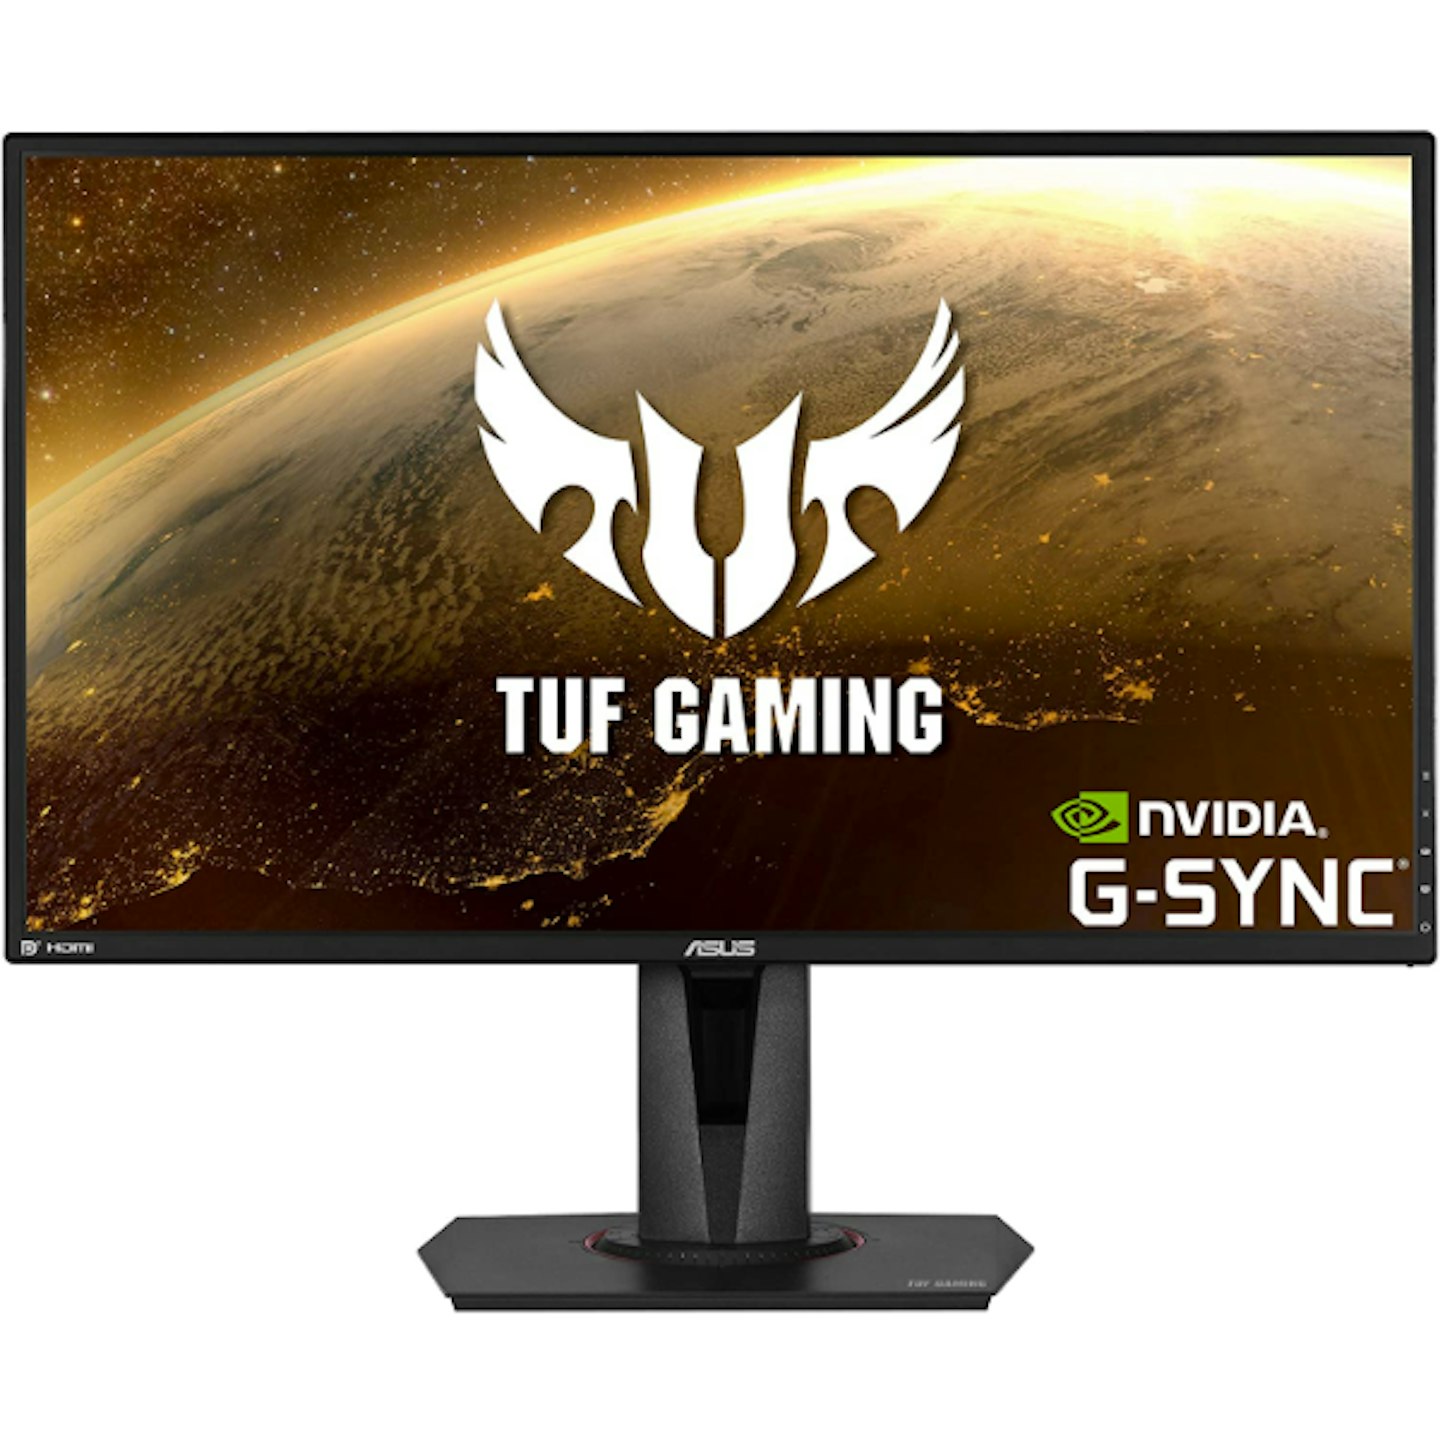 https://images.bauerhosting.com/legacy/media/6061/f65a/6018/bad2/be89/5551/ASUS-TUF-Gaming.png?auto=format&w=1440&q=80